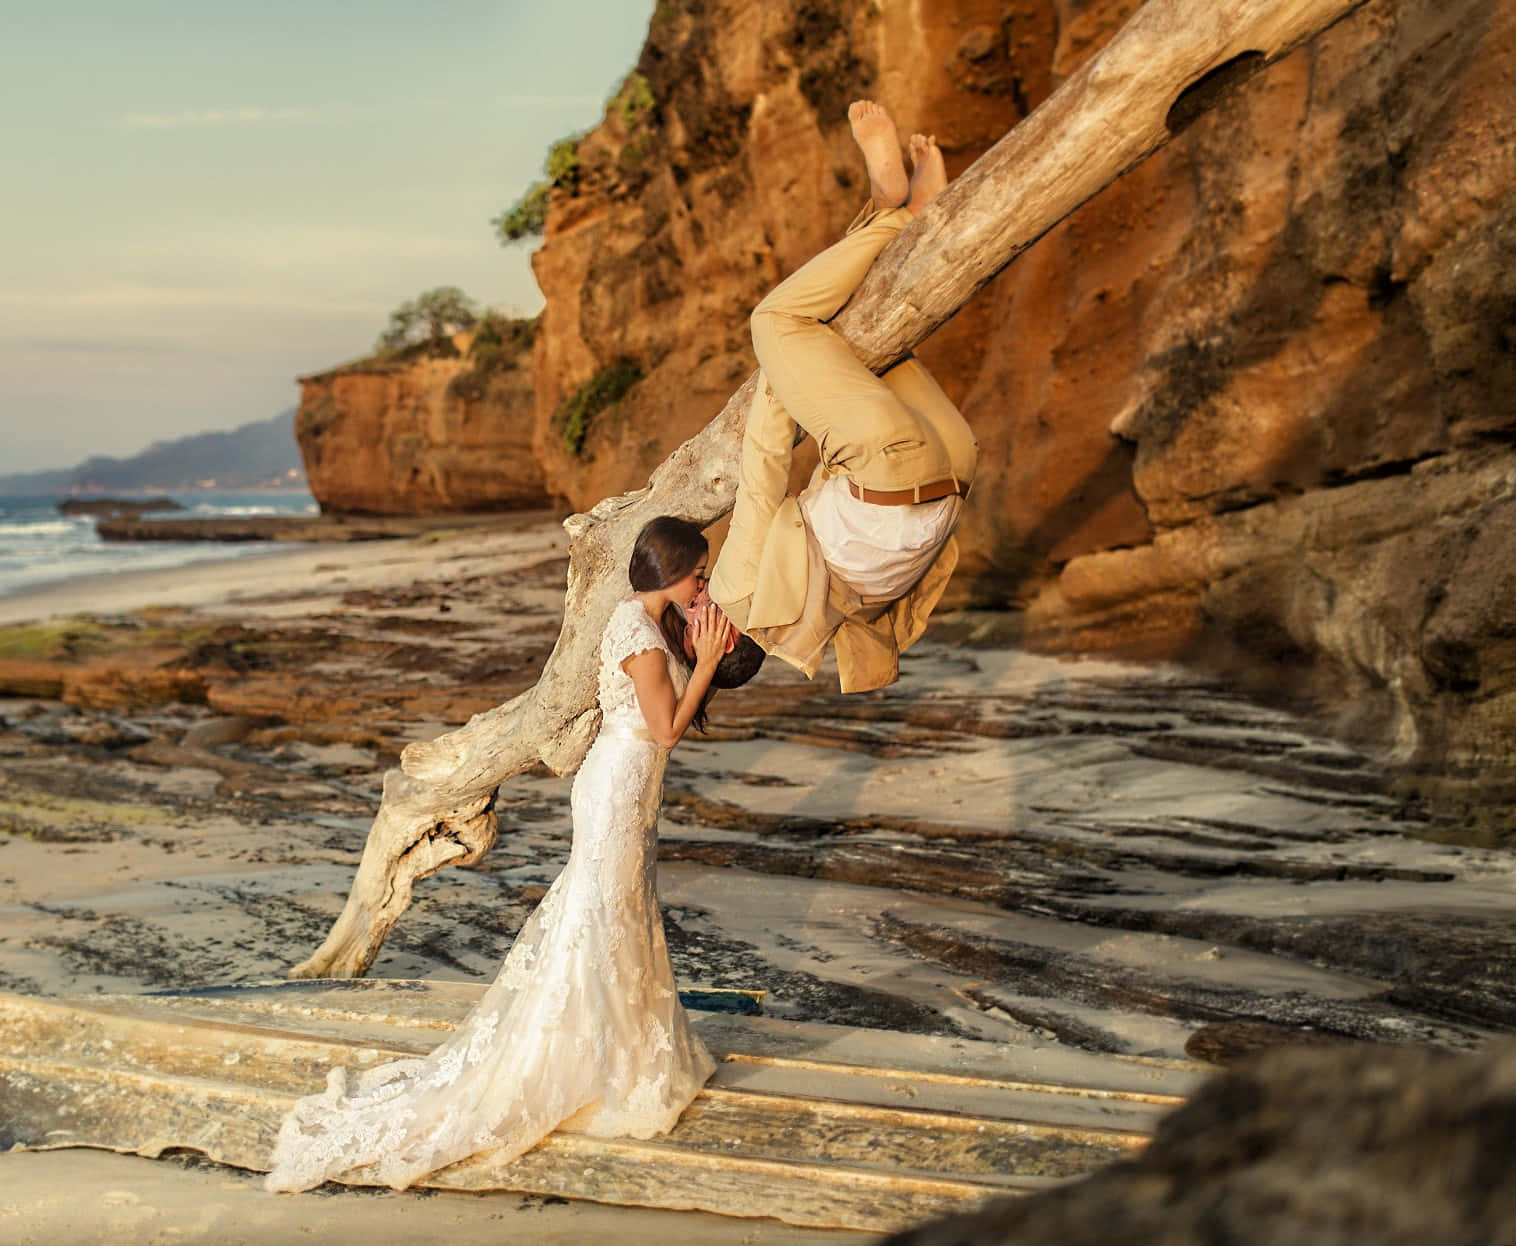 "ethereal Love - Bride And Groom Embrace On The Beach At Sunset" Wallpaper